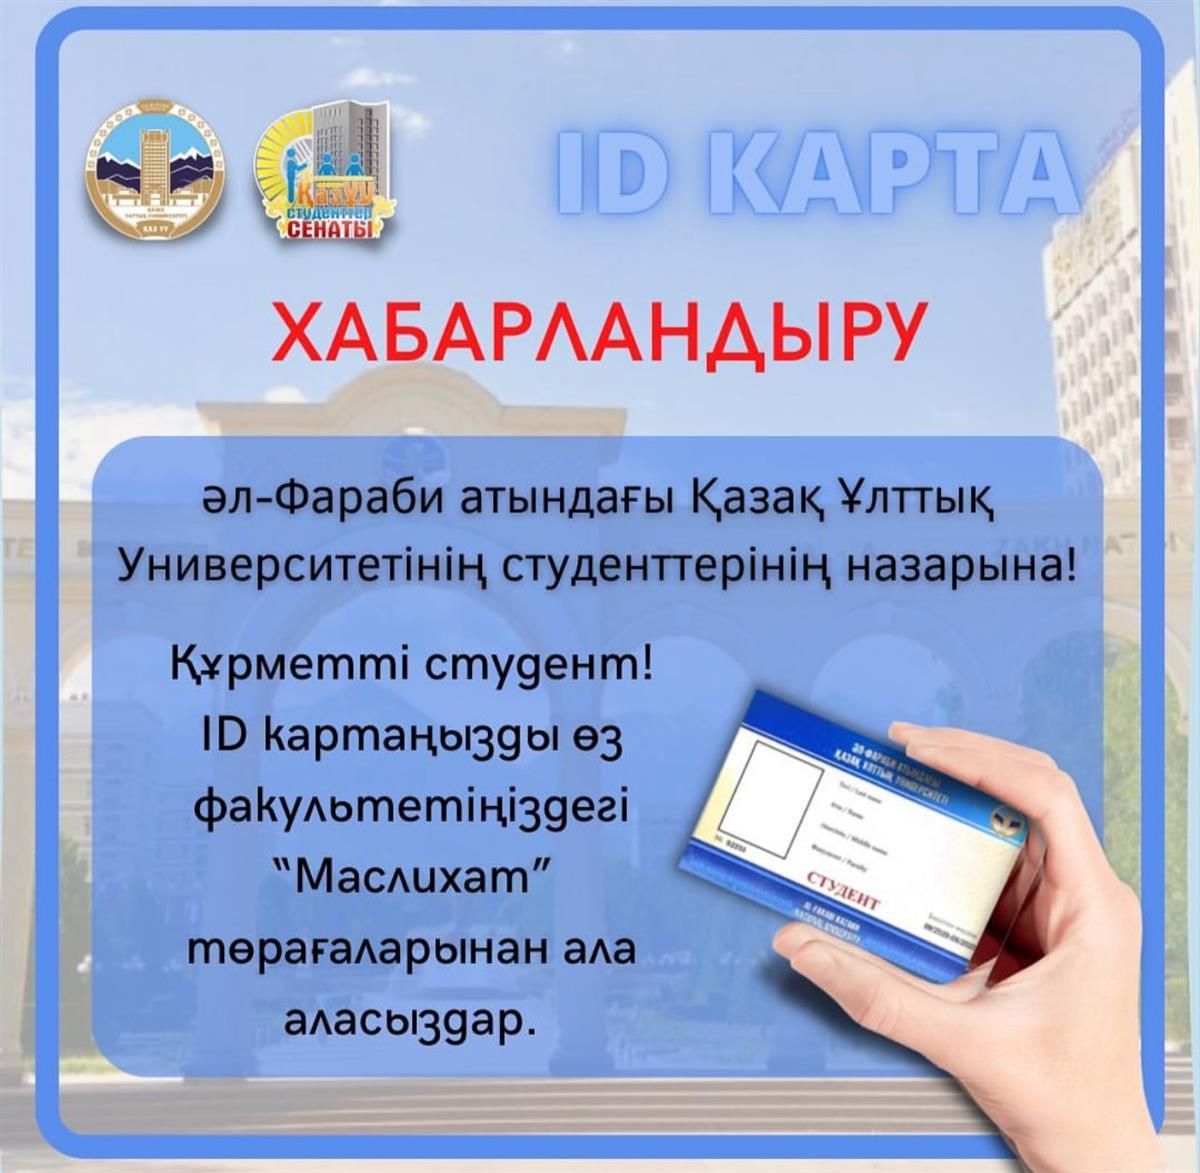 Detailed information about the "ID-card" for 1st year students